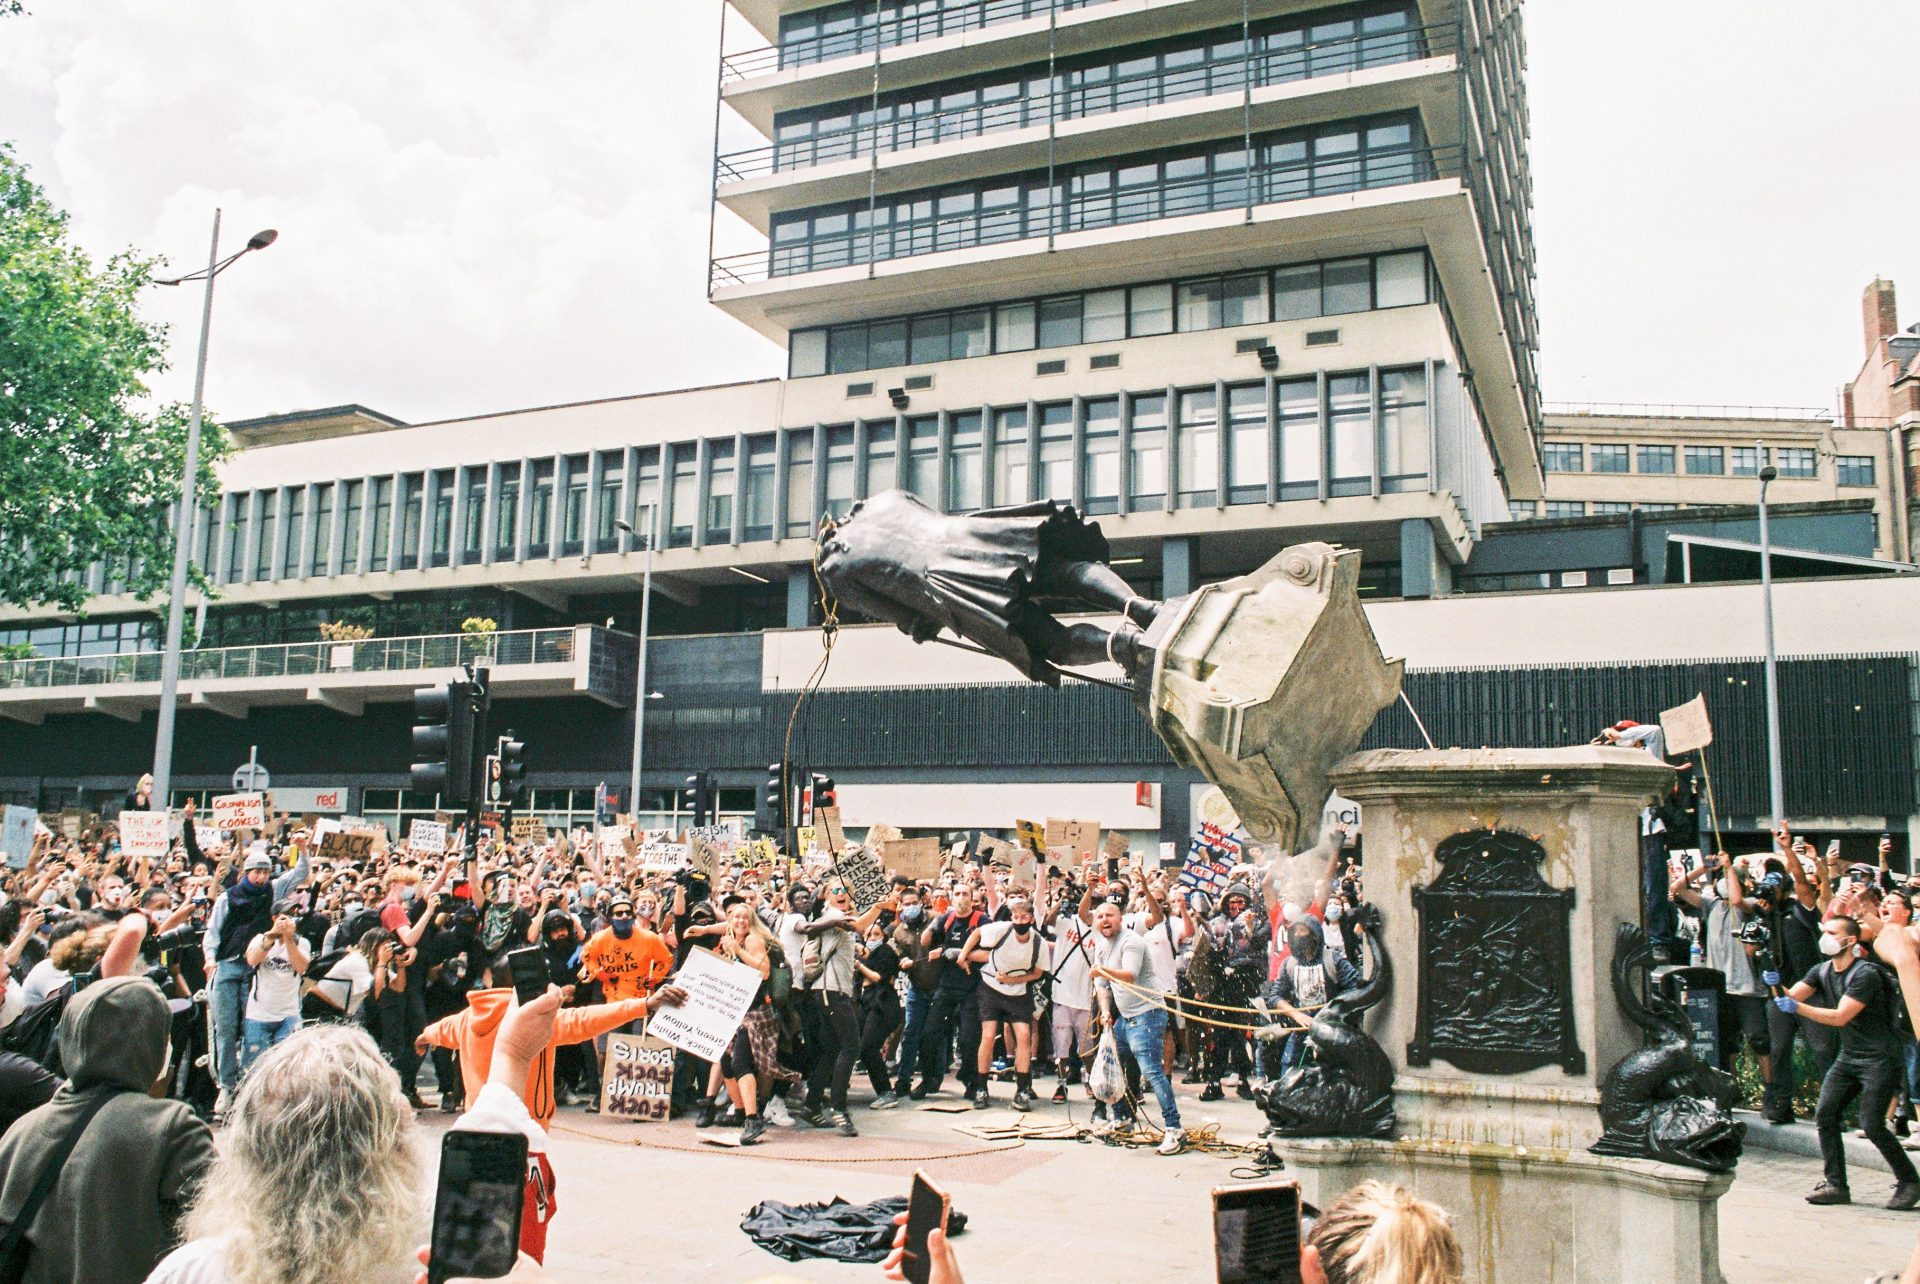 Black Lives Matter protesters topple the statue of slave owner Sir Edward Colston In Bristol, June 2020. The incident became a worldwide touchstone for what is seen by some as a battle of generations. Photo: Harry Pugsley/Getty Images.